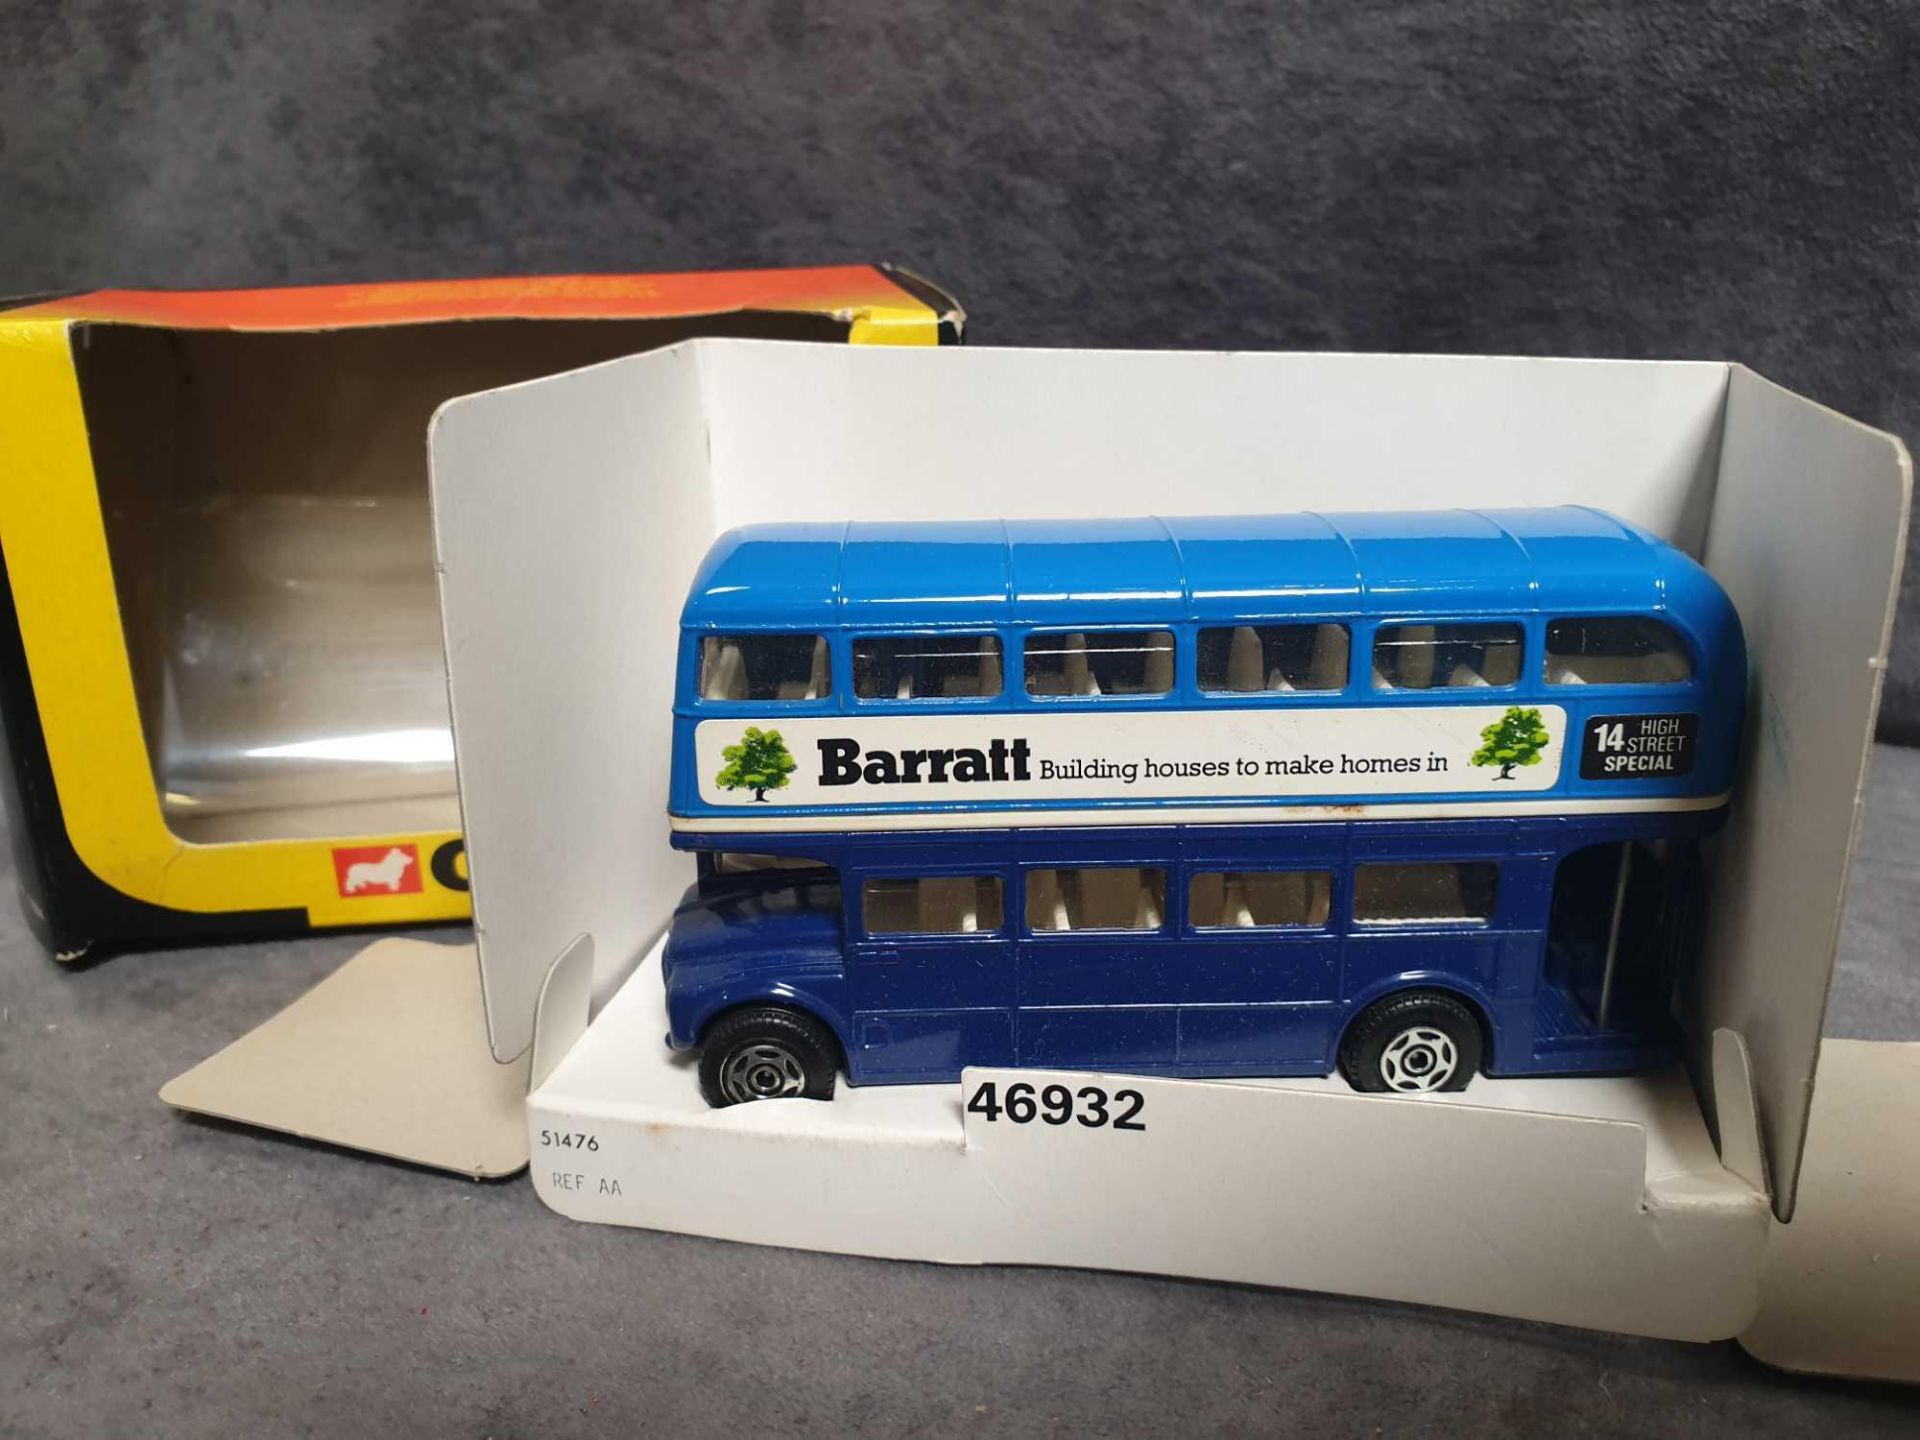 Mint Corgi Diecast #46932 London Routemaster Bus Barratt Homes Livery With Box (cellophane crushed)